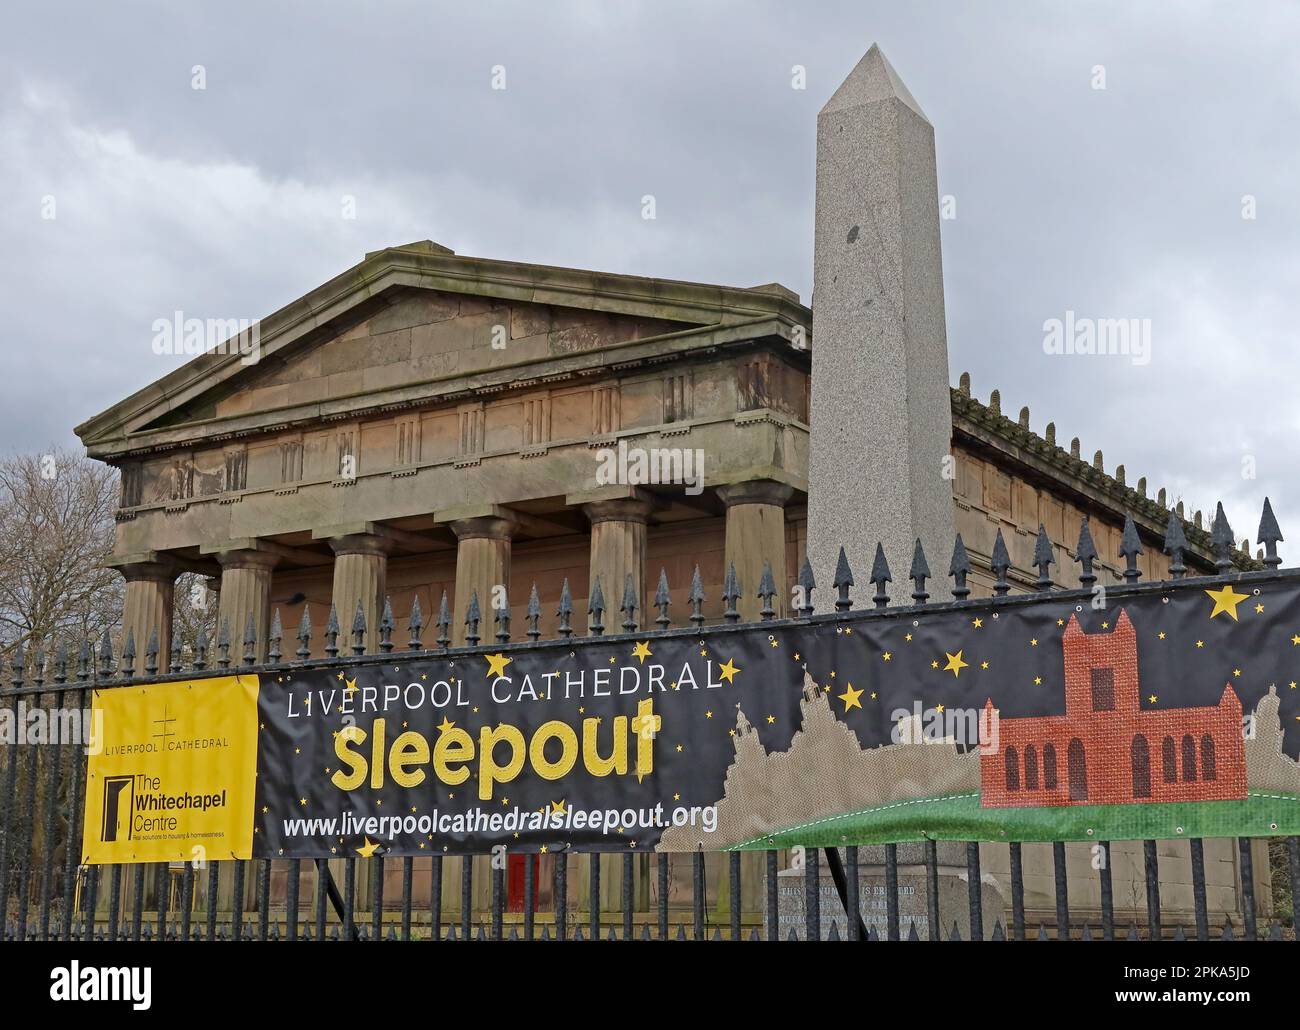 Poster advertising The Whitechapel Centre, Liverpool cathedral charity Sleepout, St James Rd, Liverpool , Merseyside, England, UK, L1 7AZ Stock Photo